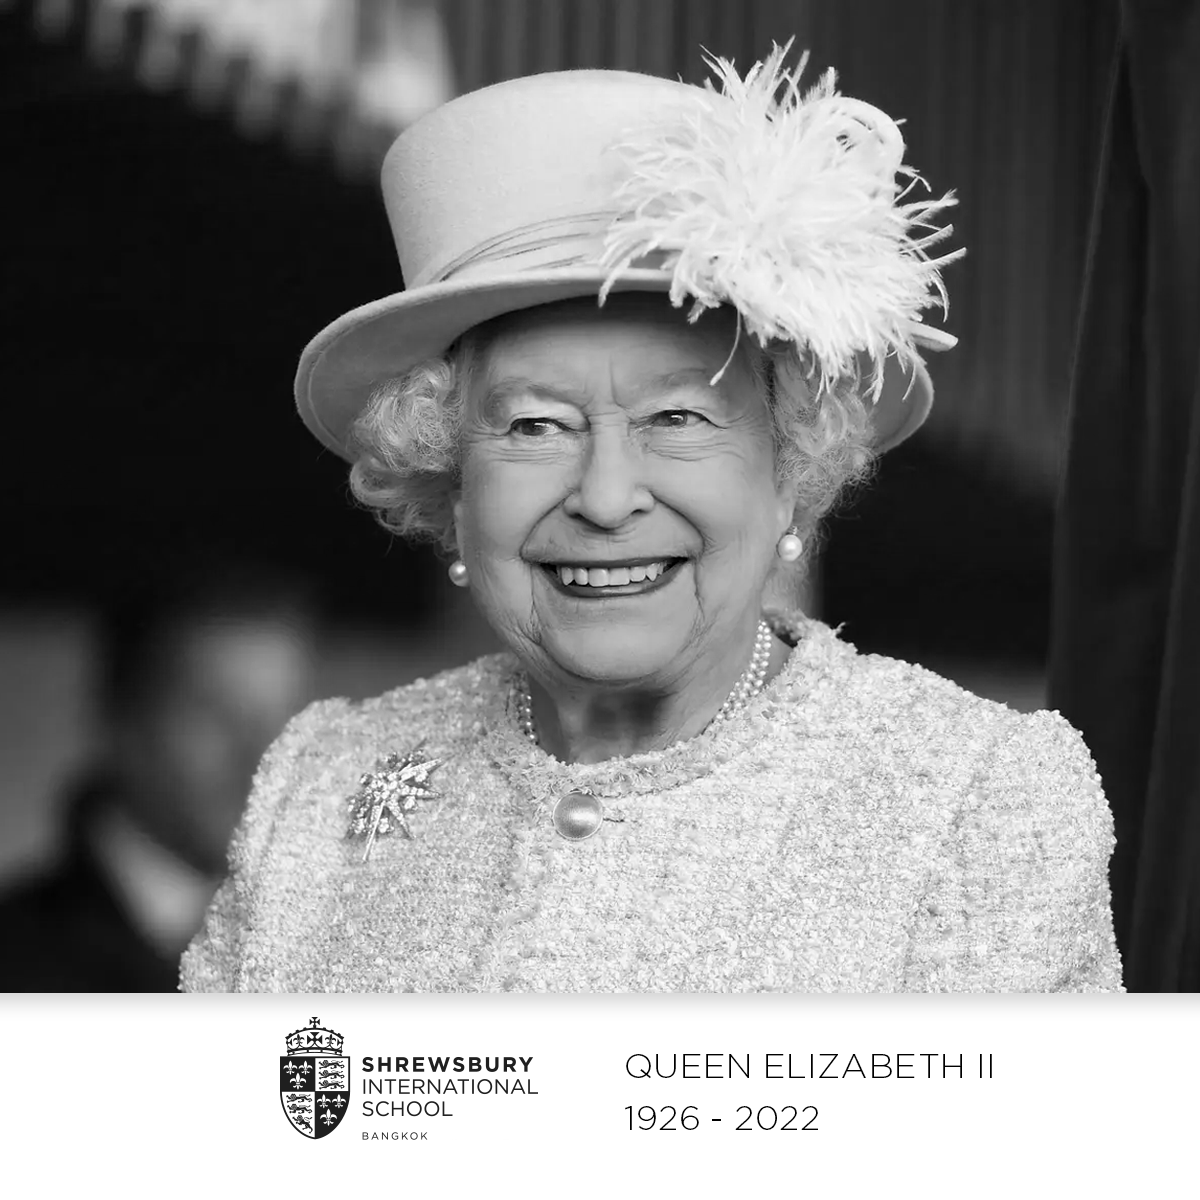 IN REMEMBRANCE OF HER MAJESTY QUEEN ELIZABETH II